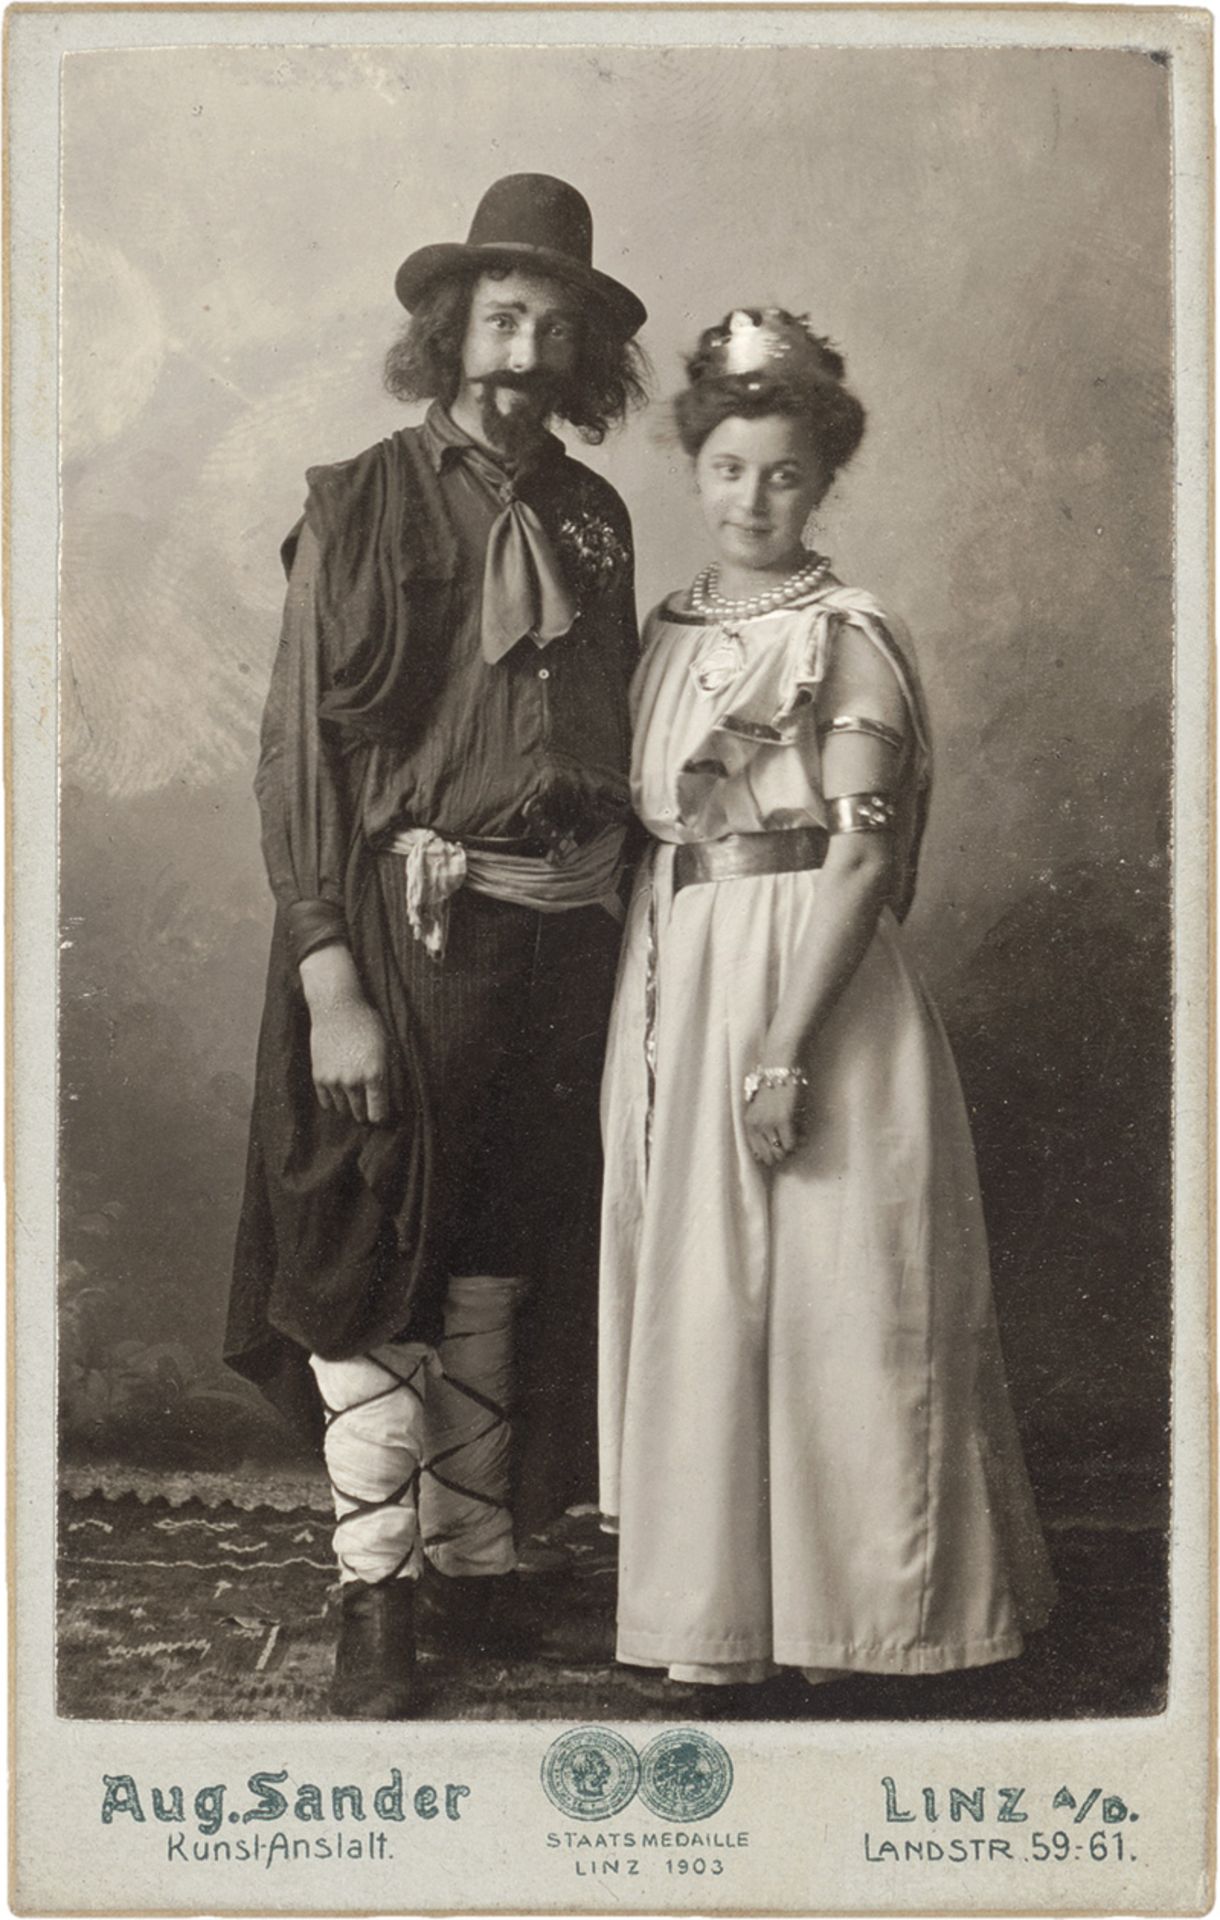 Sander, August: Studio portraits of couple in costume and of a woman - Image 2 of 2